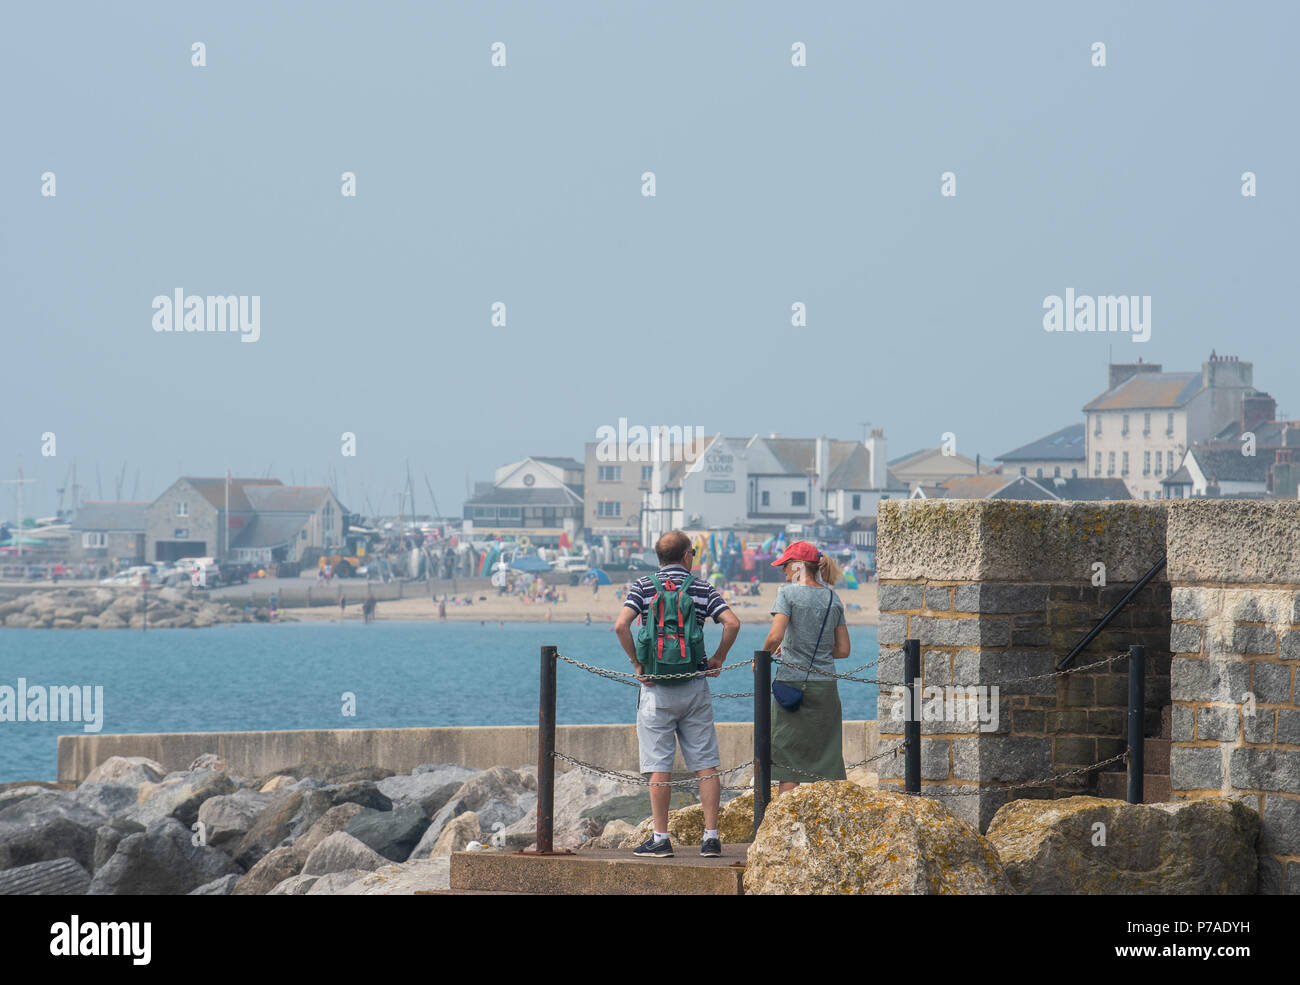 Lyme Regis, Dorset, UK. 5th July 2018. UK Weather: Hot with hazy sunshine in Lyme Regis. Visitors and locals head to the beach at the coastal resort of Lyme Regis. The outlook is good with high pressure dominant brigning hot conditions and humidity over the weekend. Credit: Celia McMahon/Alamy Live News Stock Photo